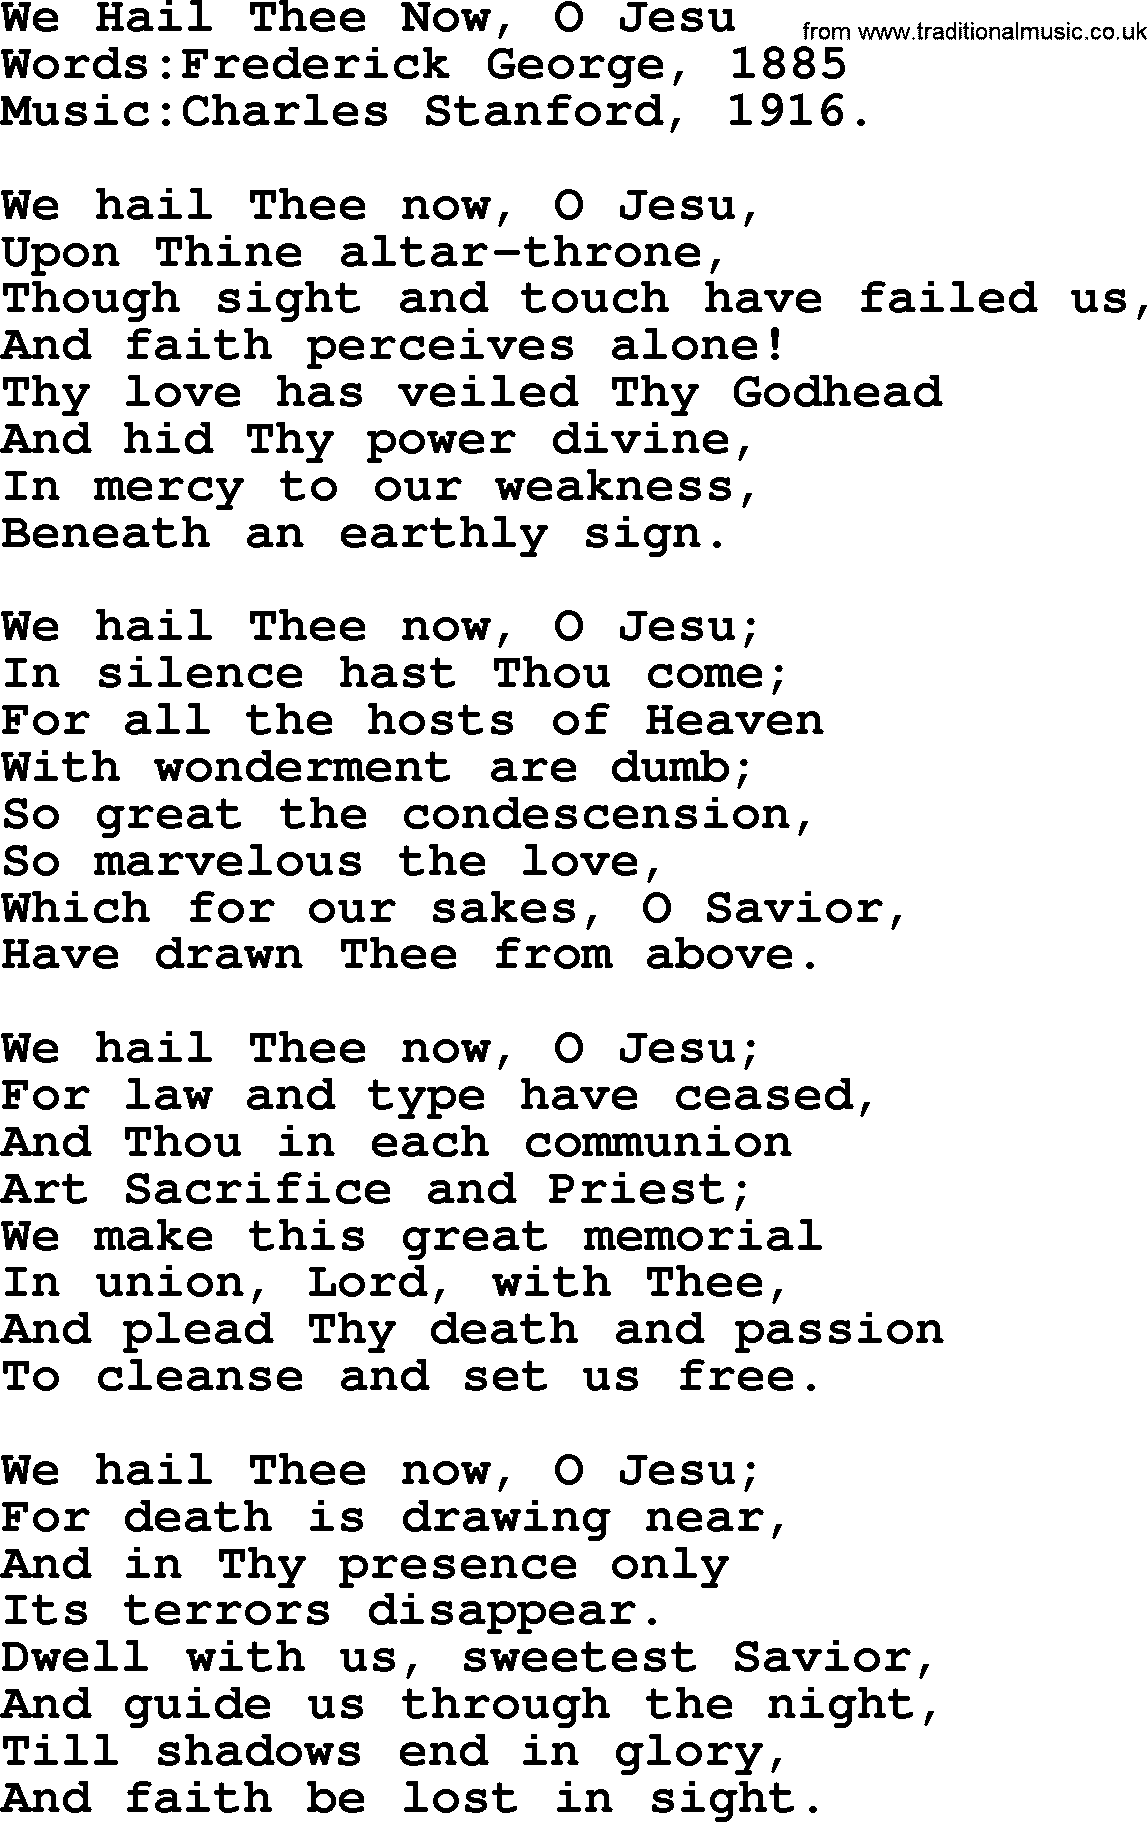 Christian hymns and song lyrics for Communion(The Eucharist): We Hail Thee Now, O Jesu, lyrics with PDF